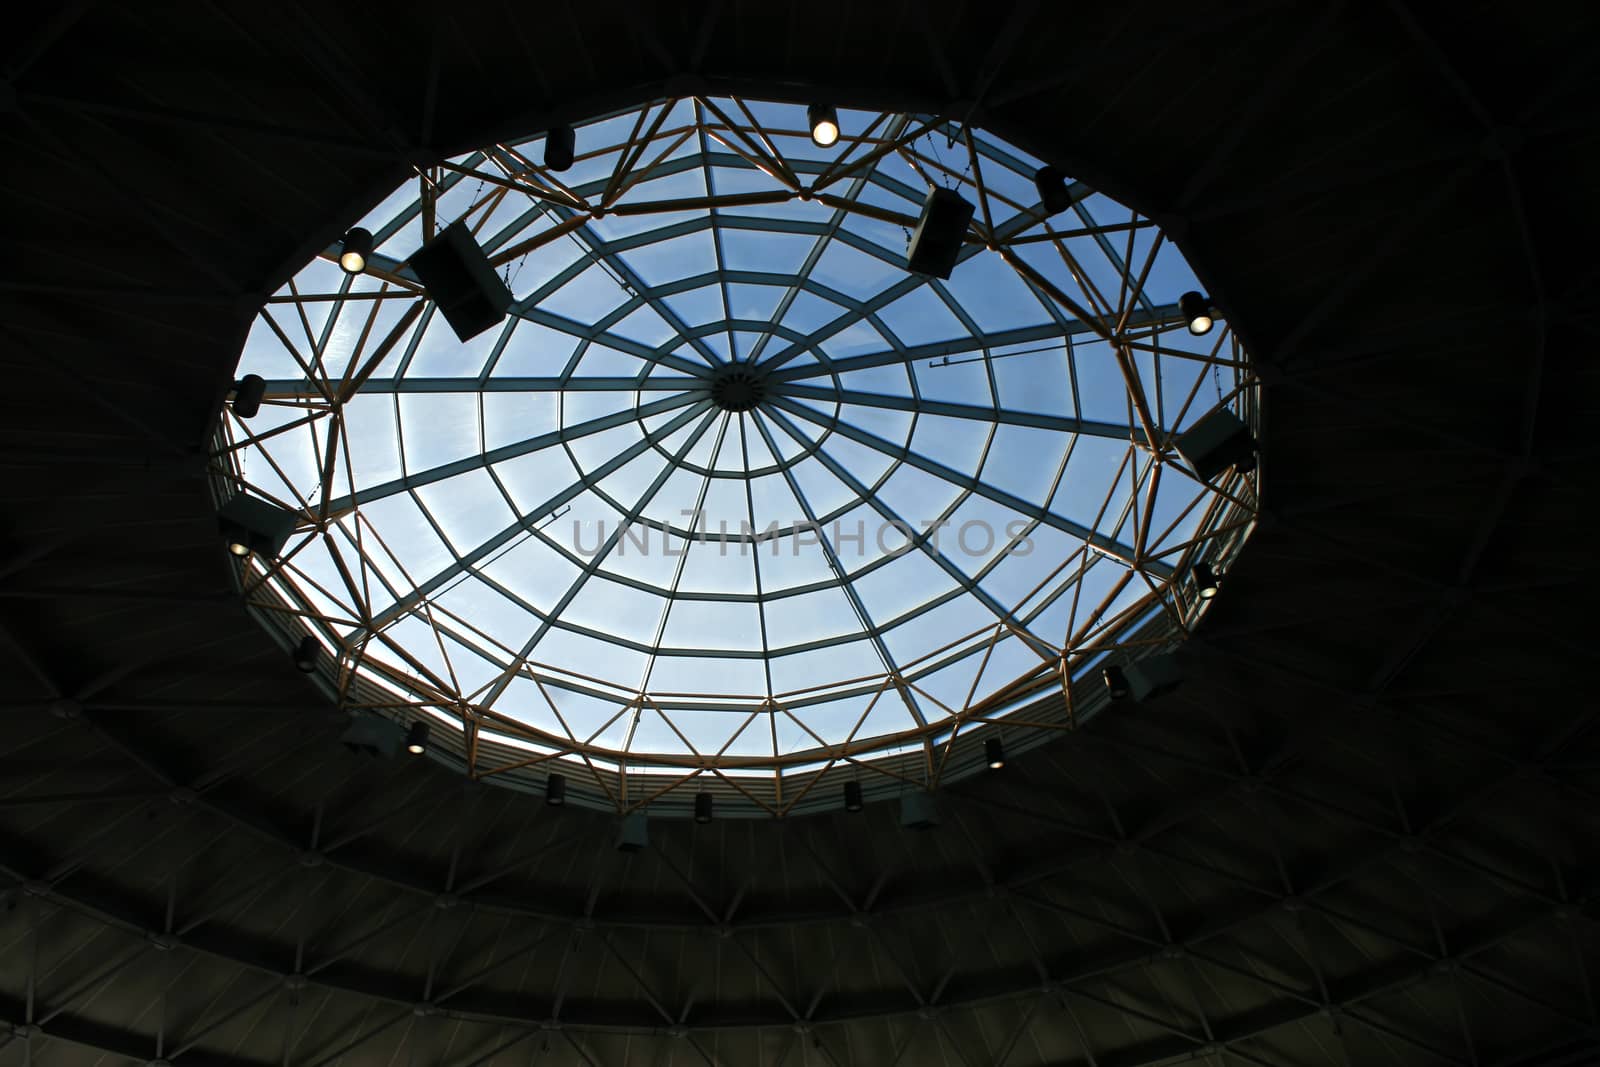 A large window in a roof with a geometric pattern